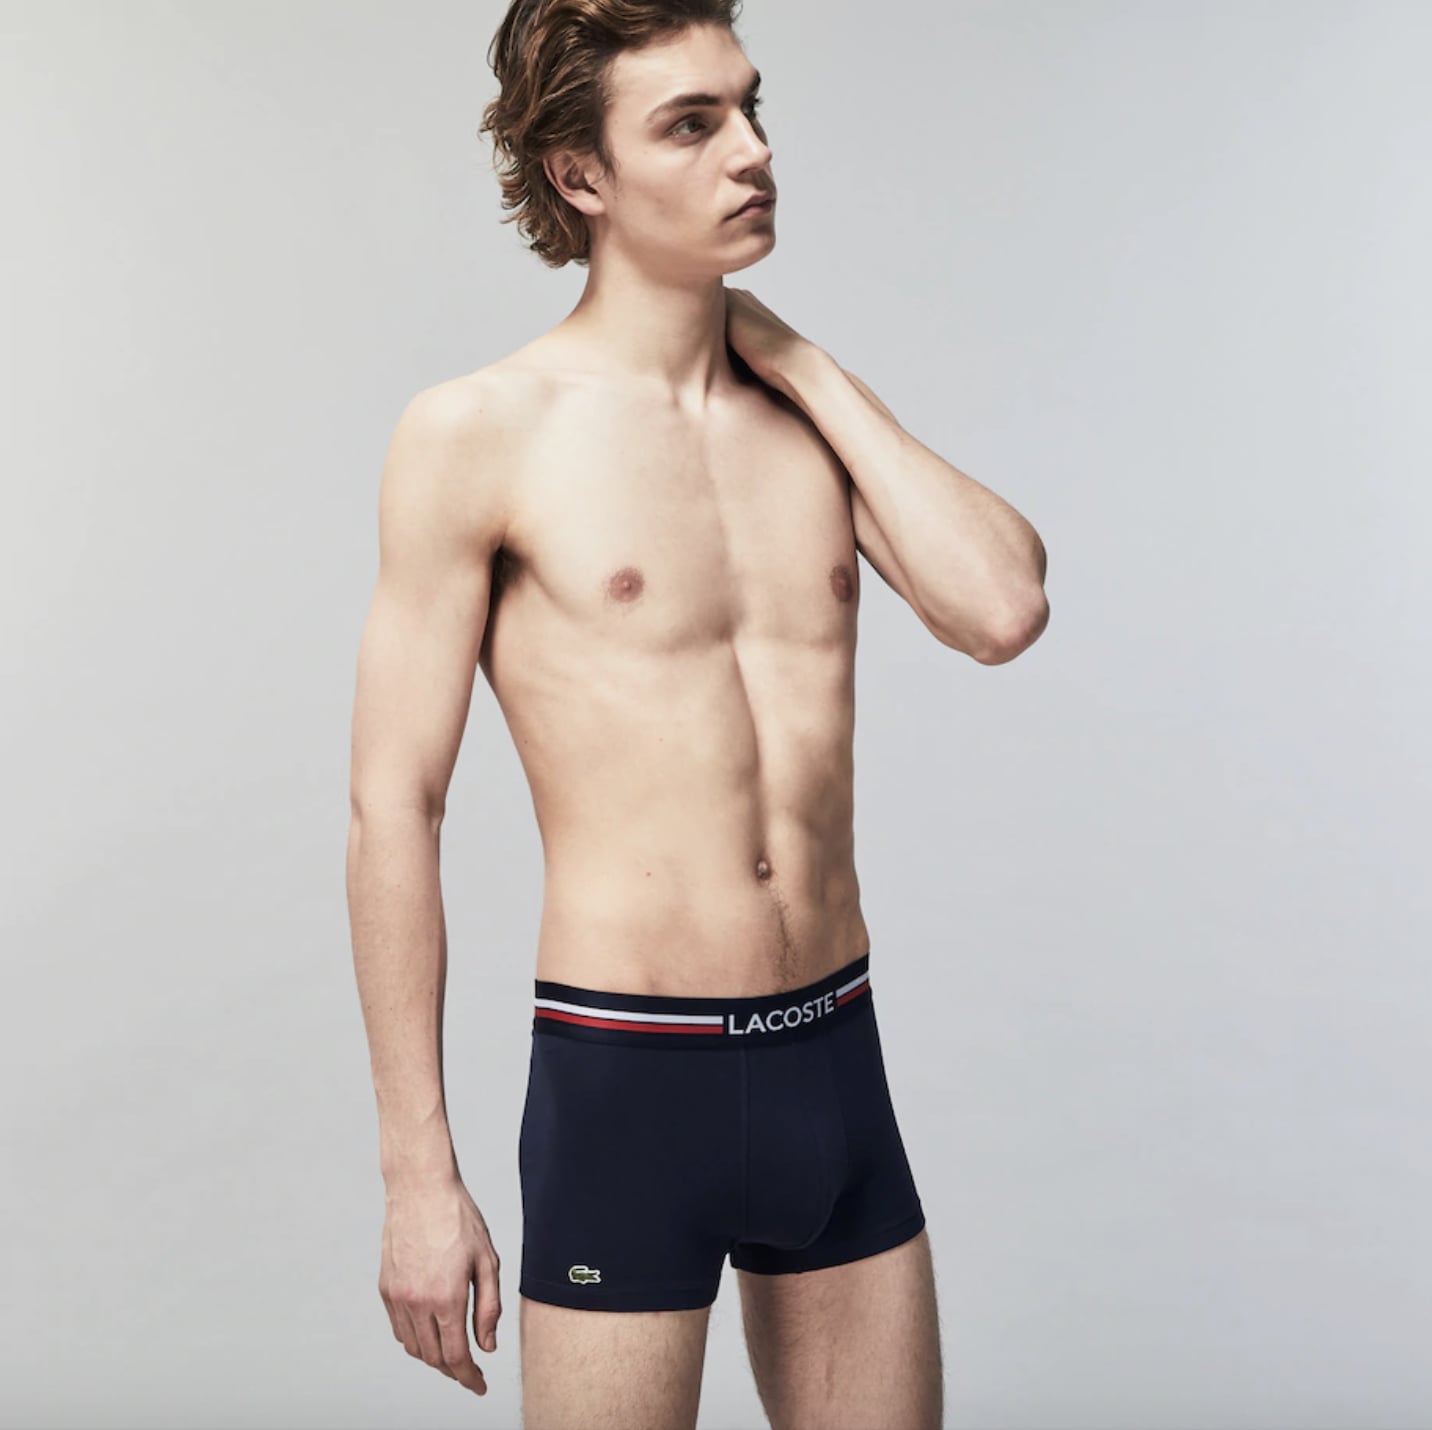 Lacoste Iconic Boxer Briefs With Three-Tone Waistband, Since We Live in  Our Underwear Now, Here Are the 25 Best Men's Styles to Buy Online